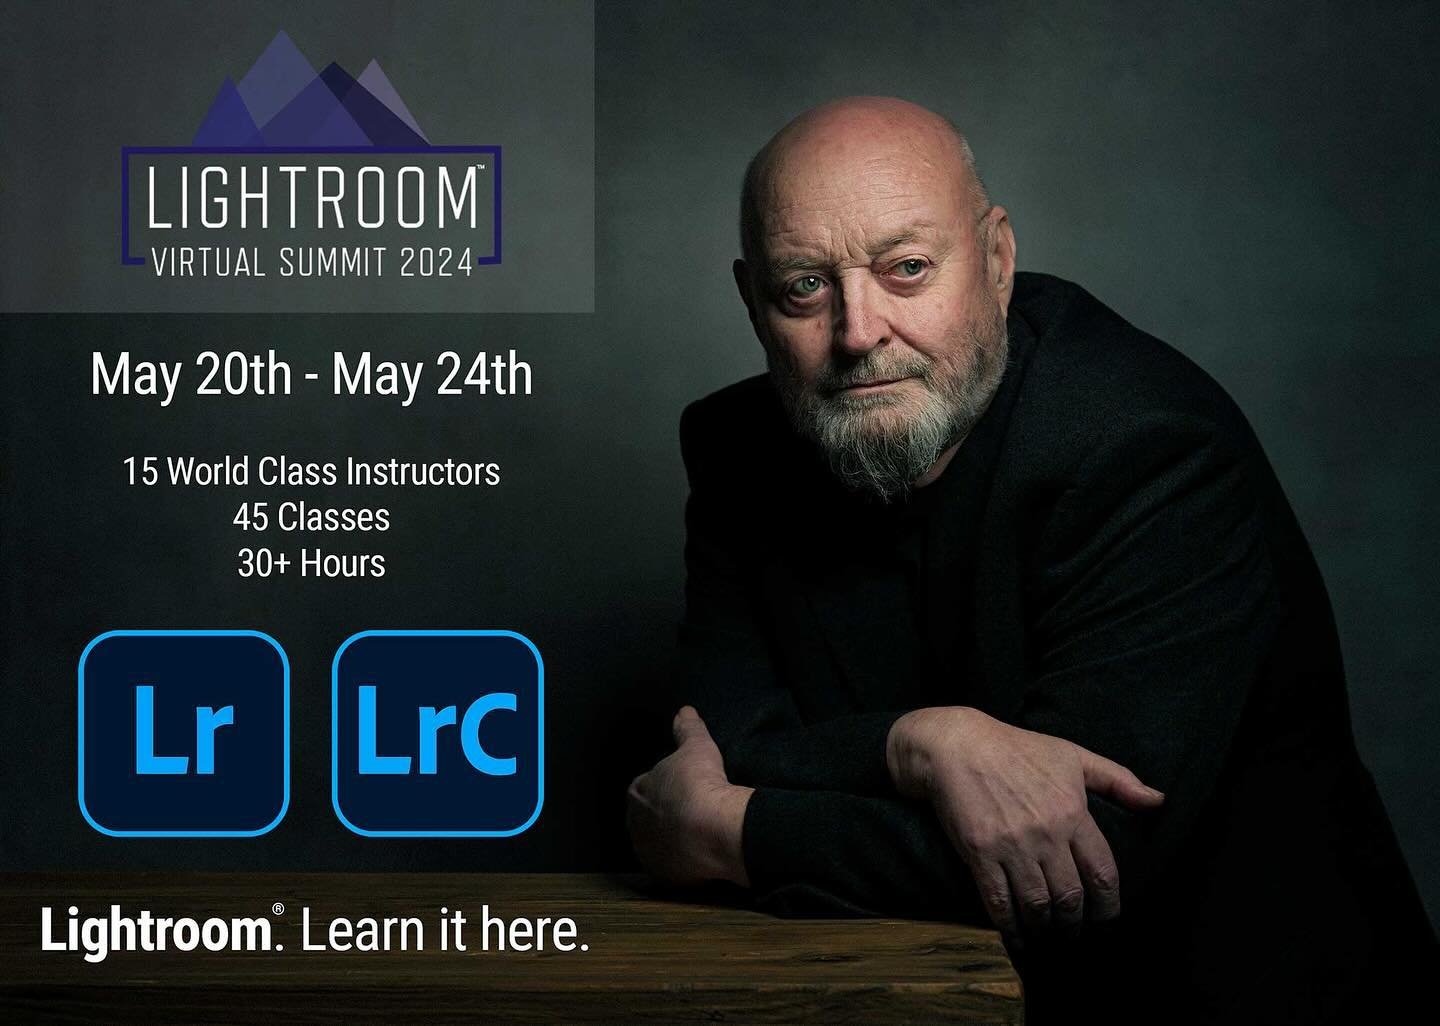 VERY happy with the 3 classes I&rsquo;ve put together for the upcoming Lightroom Virtual Summit ... especially my NEW retouching workflow that all came about from challenging myself to see if I could perform tasks that I normally ALWAYS do in Photosh